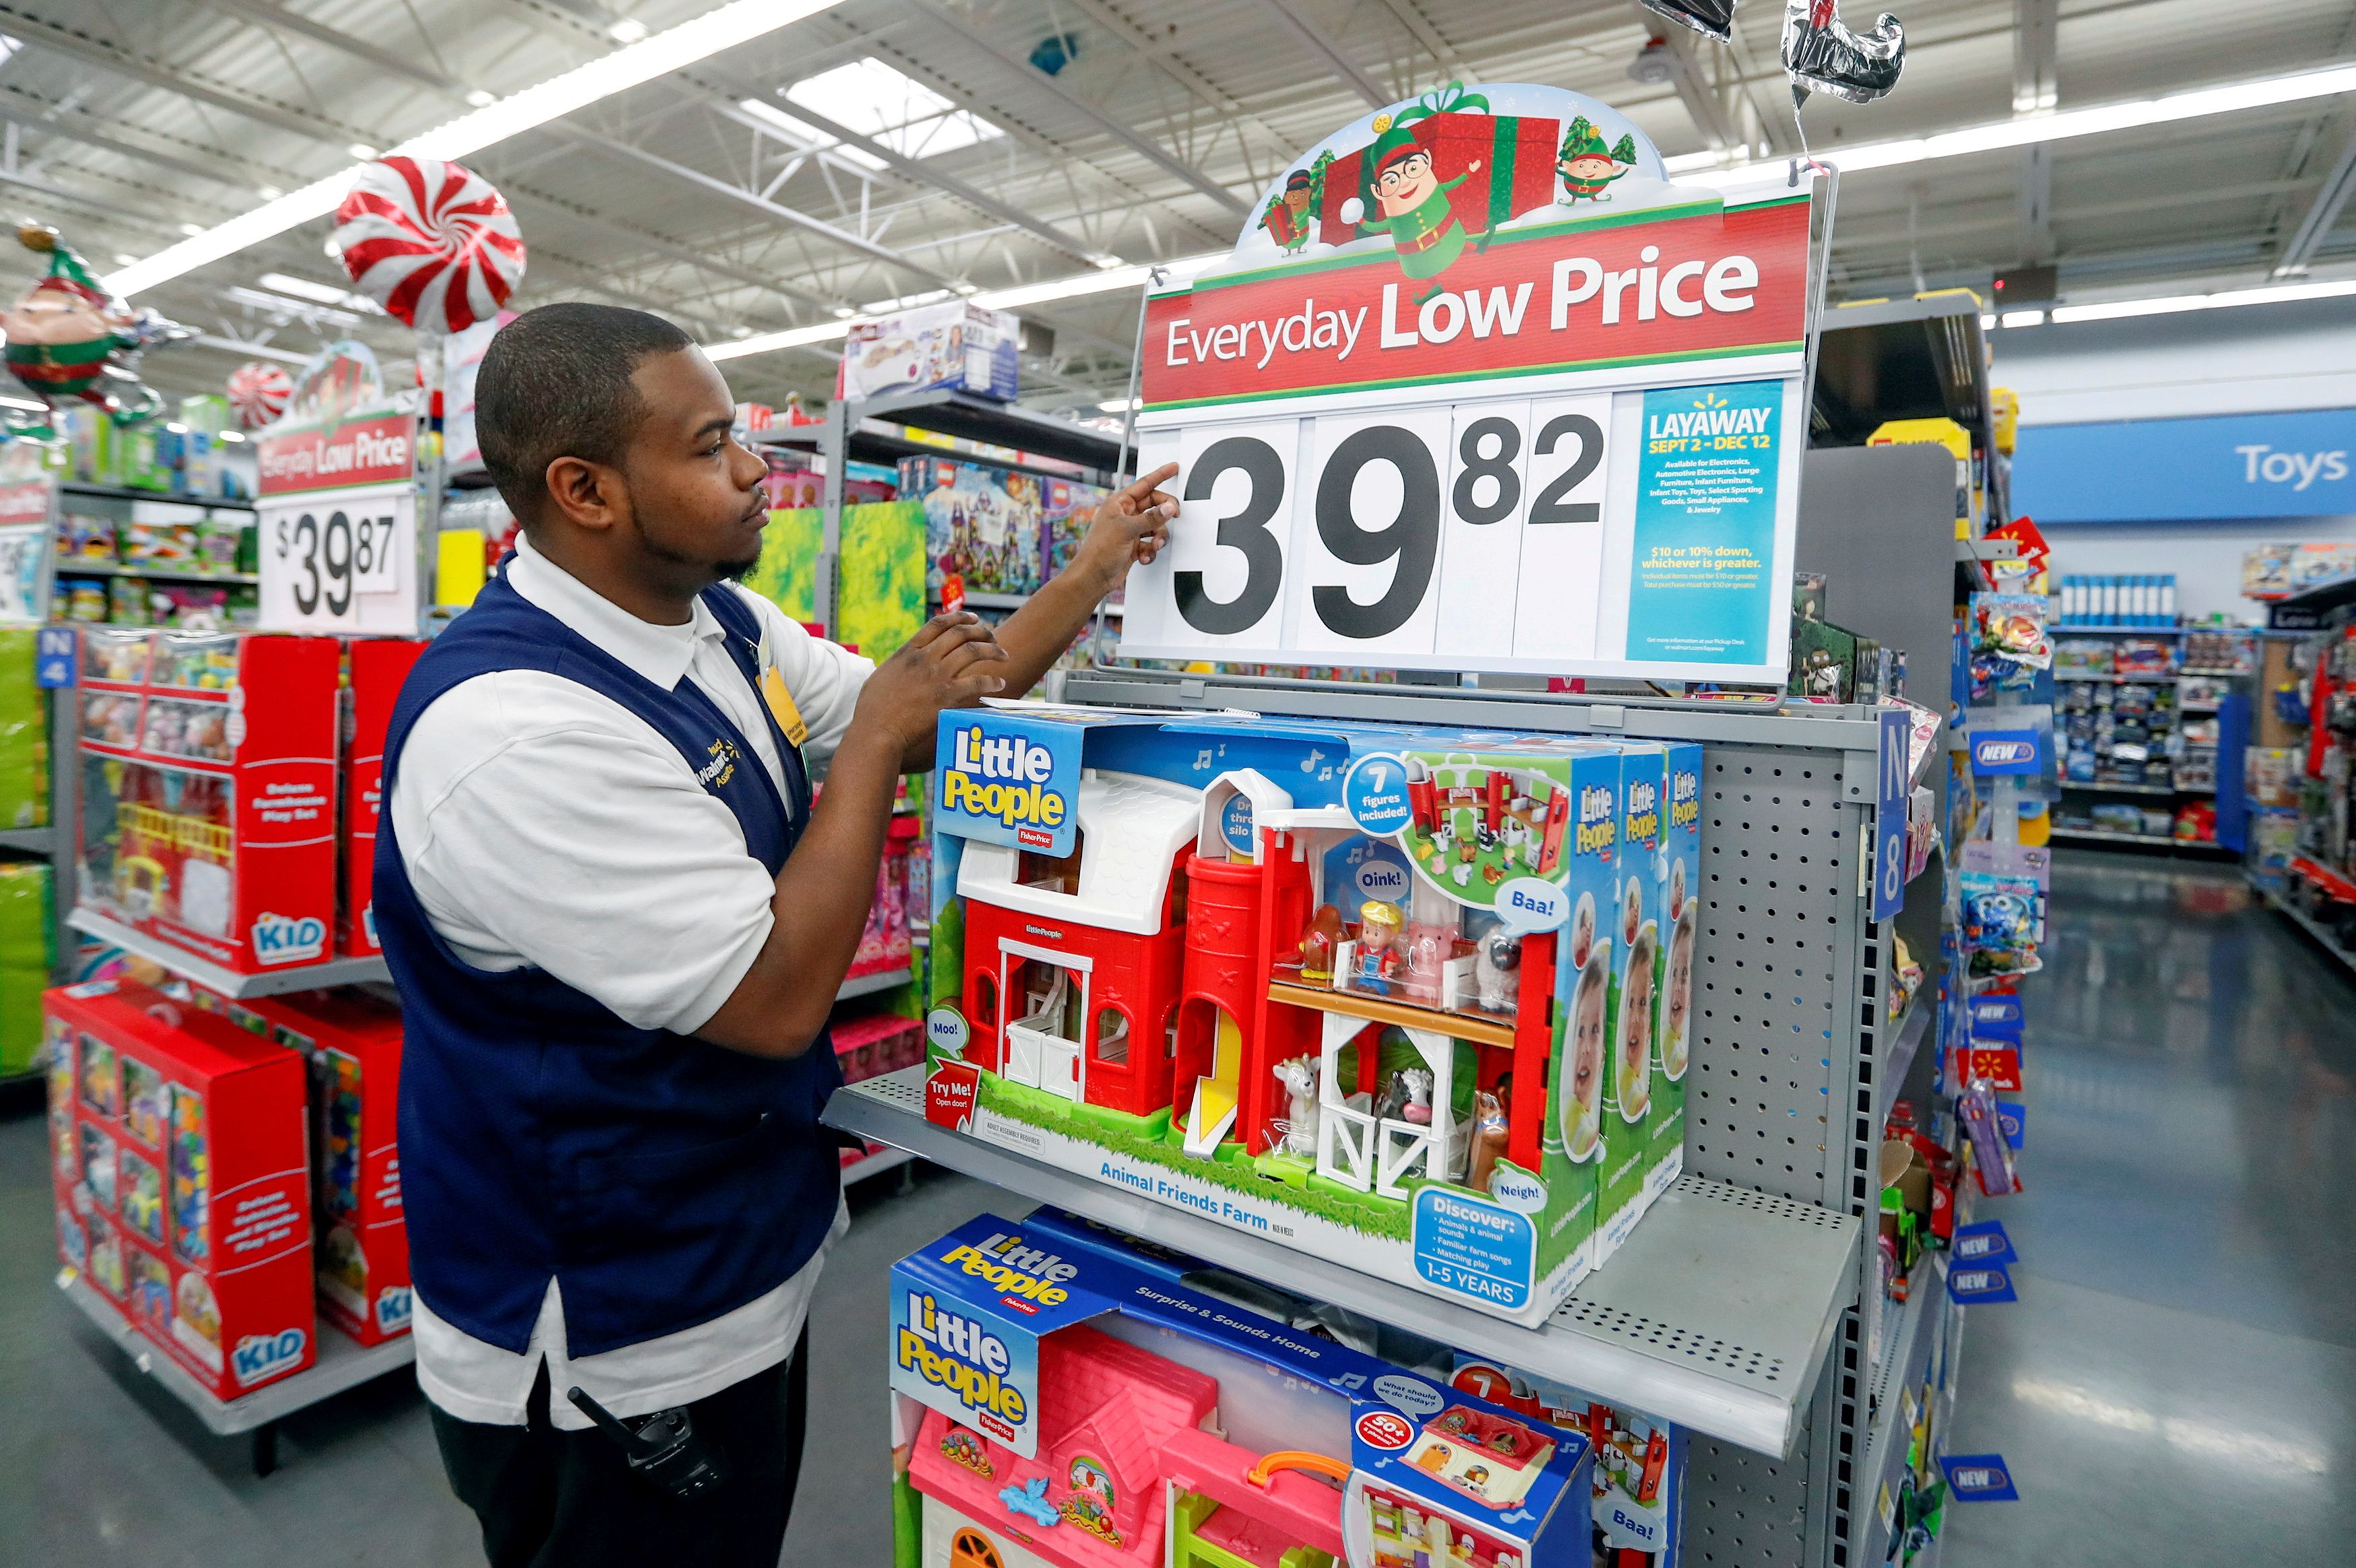 An employee puts up a price tag ahead of Black Friday at a Walmart store in Chicago